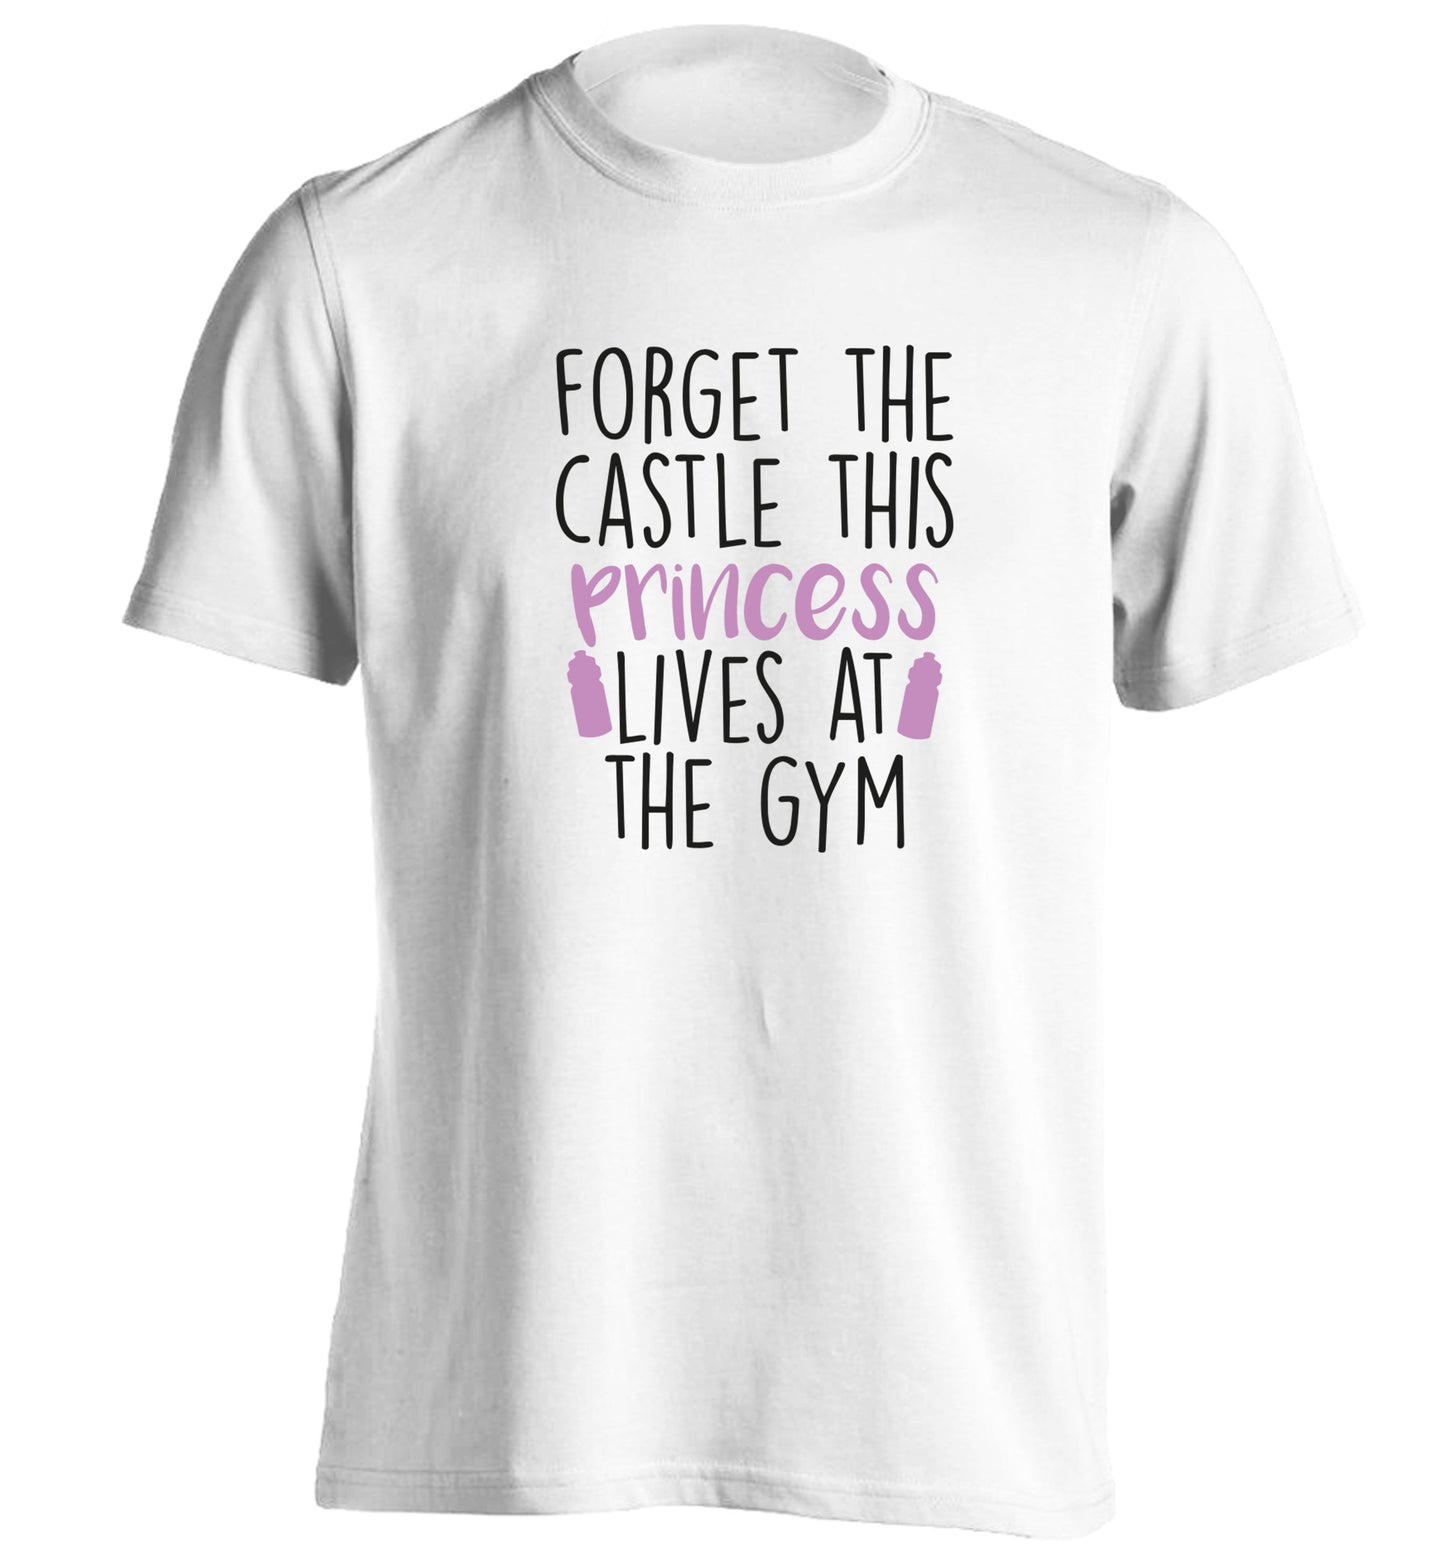 Forget the castle this princess lives at the gym adults unisex white Tshirt 2XL